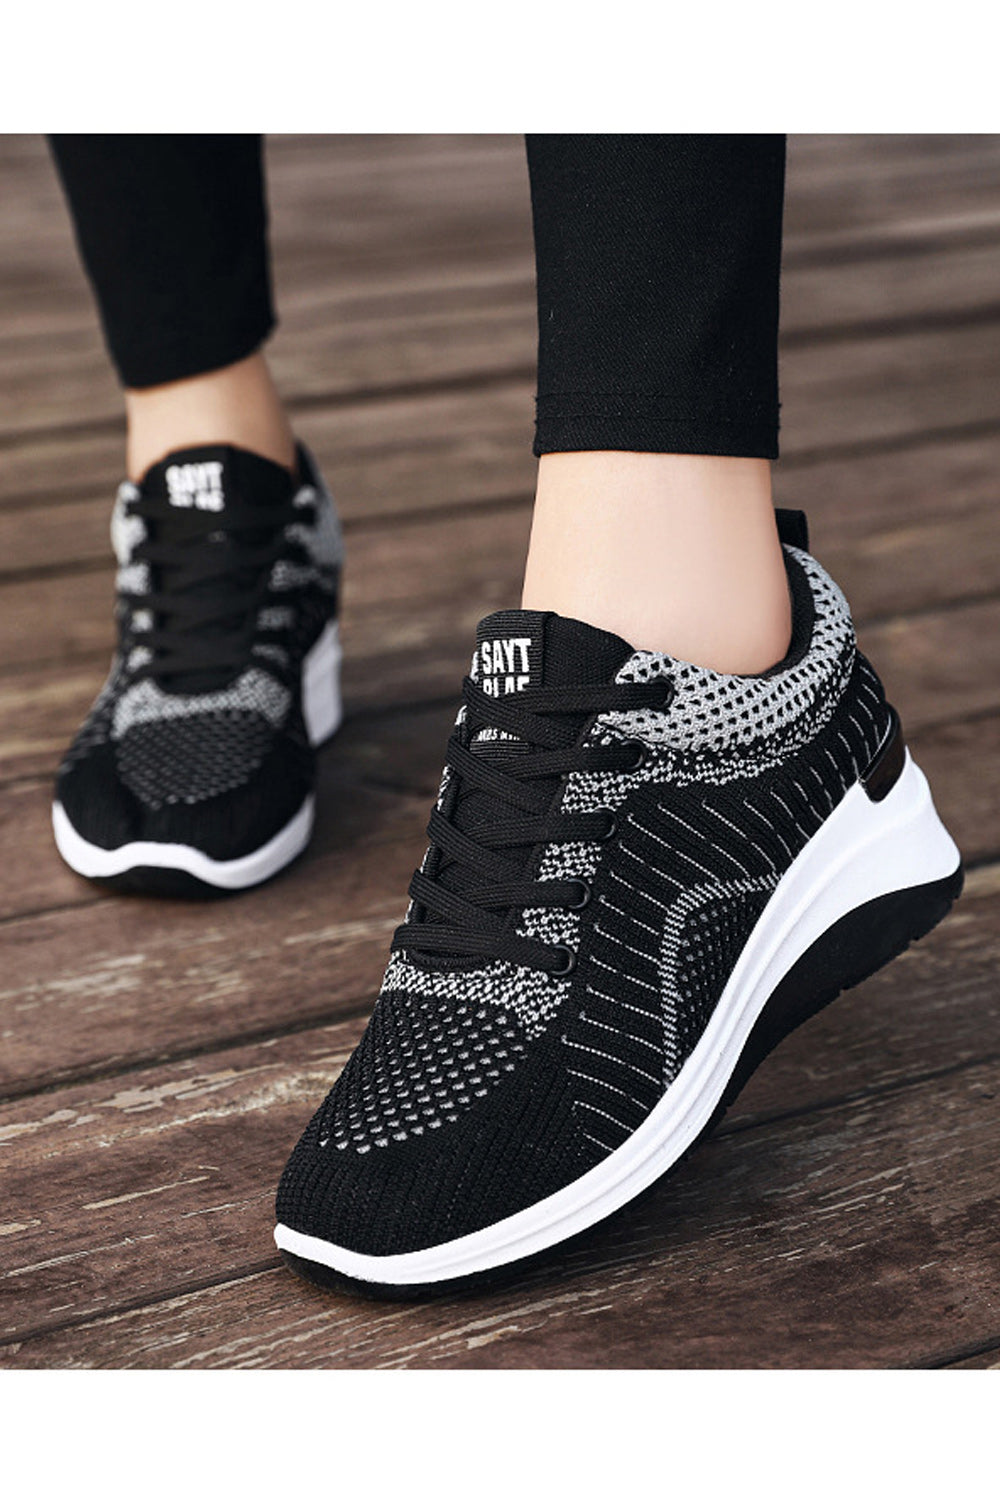 Women Pretty Solid Colored Flat Rubber Surface Restful Inner Collar Comfortable Mesh Round Head Sneaker Shoes - WSA109806